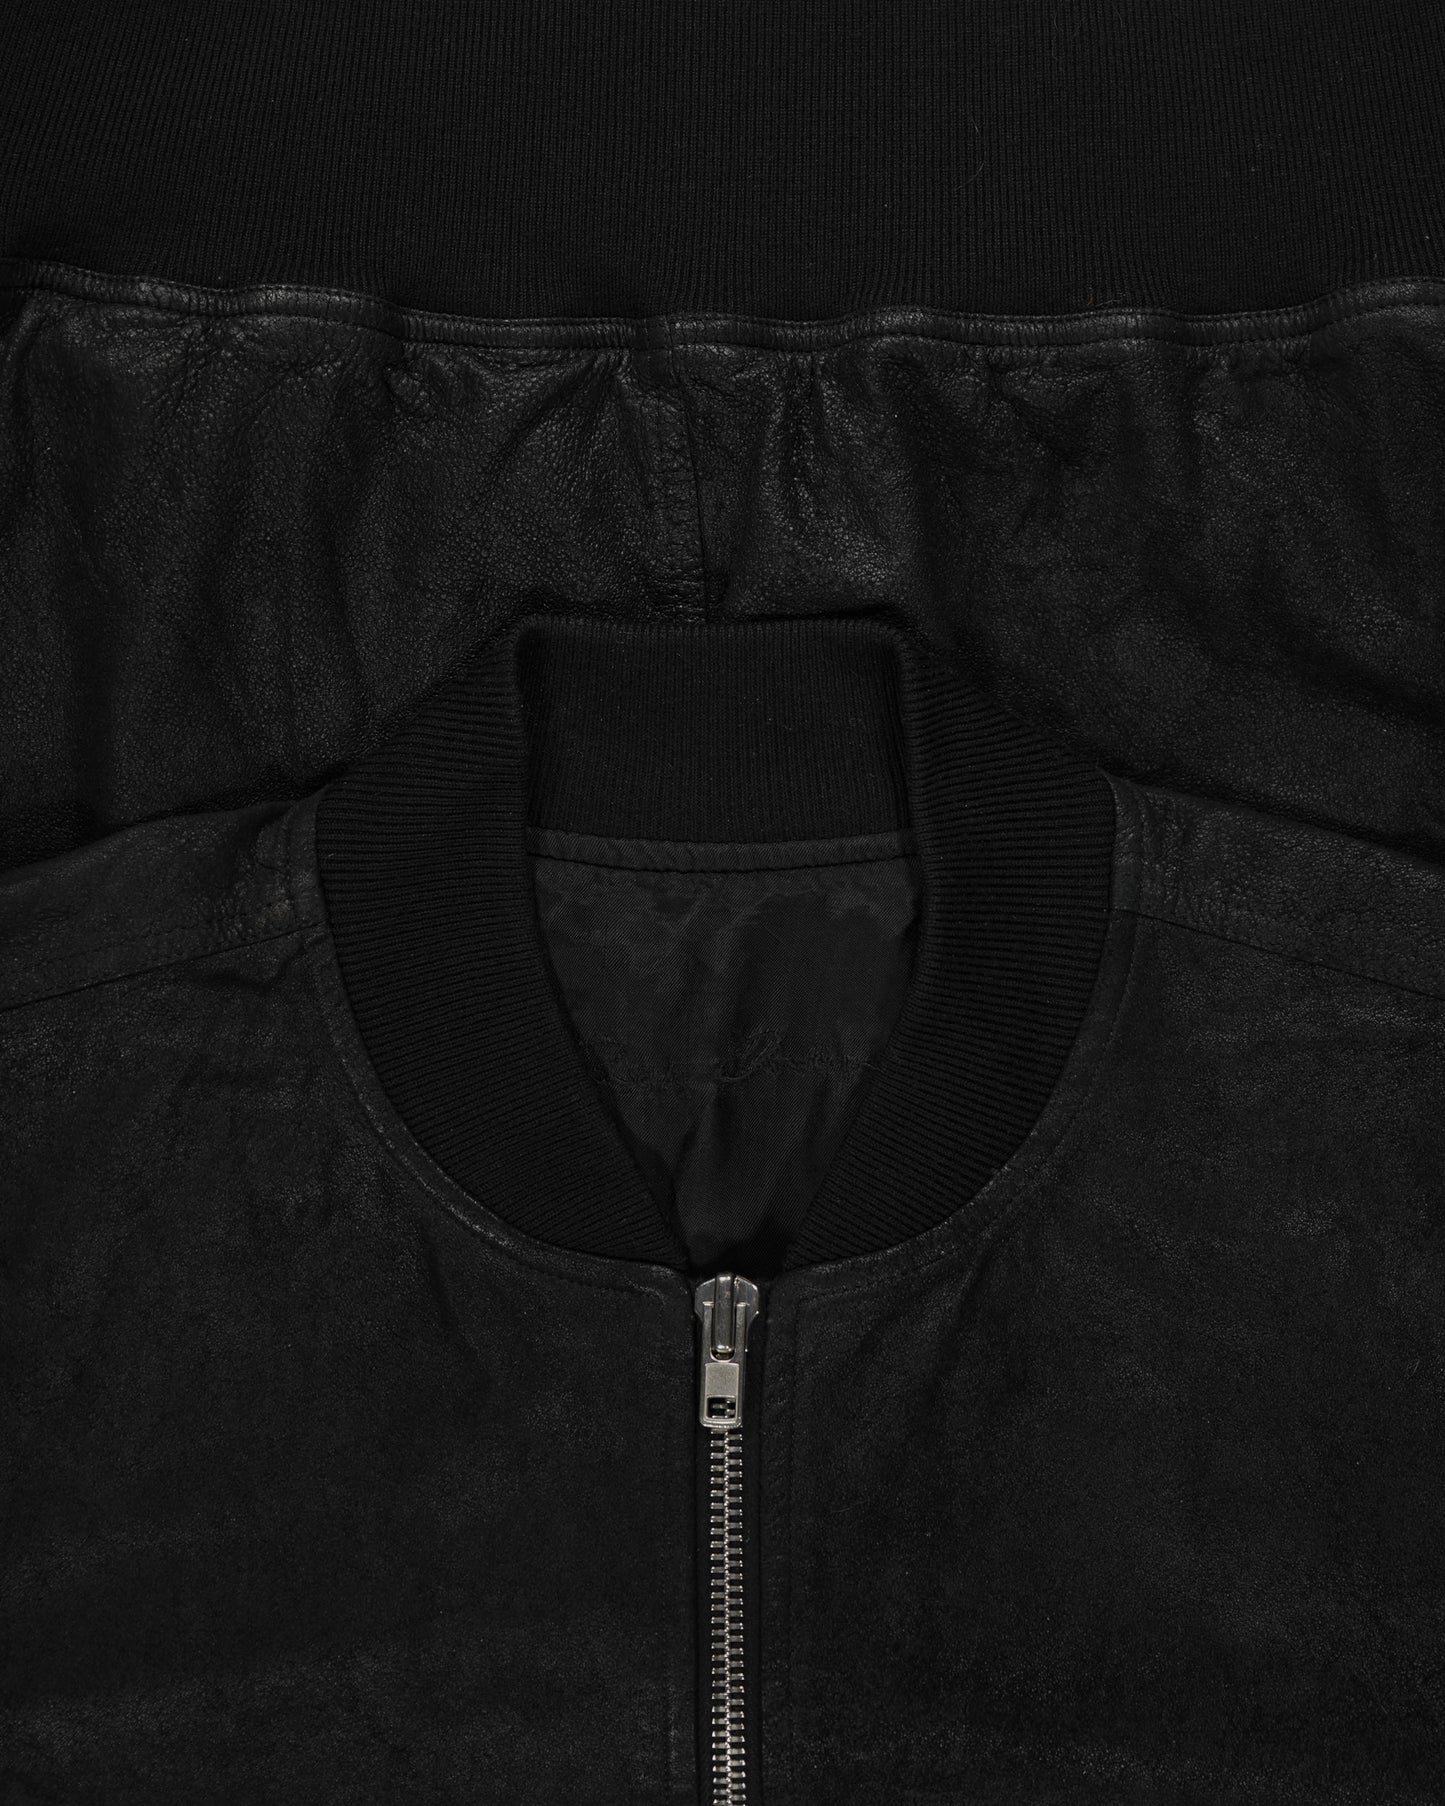 Rick Owens Blistered Leather Bomber Jacket - SS08 "Creatch"